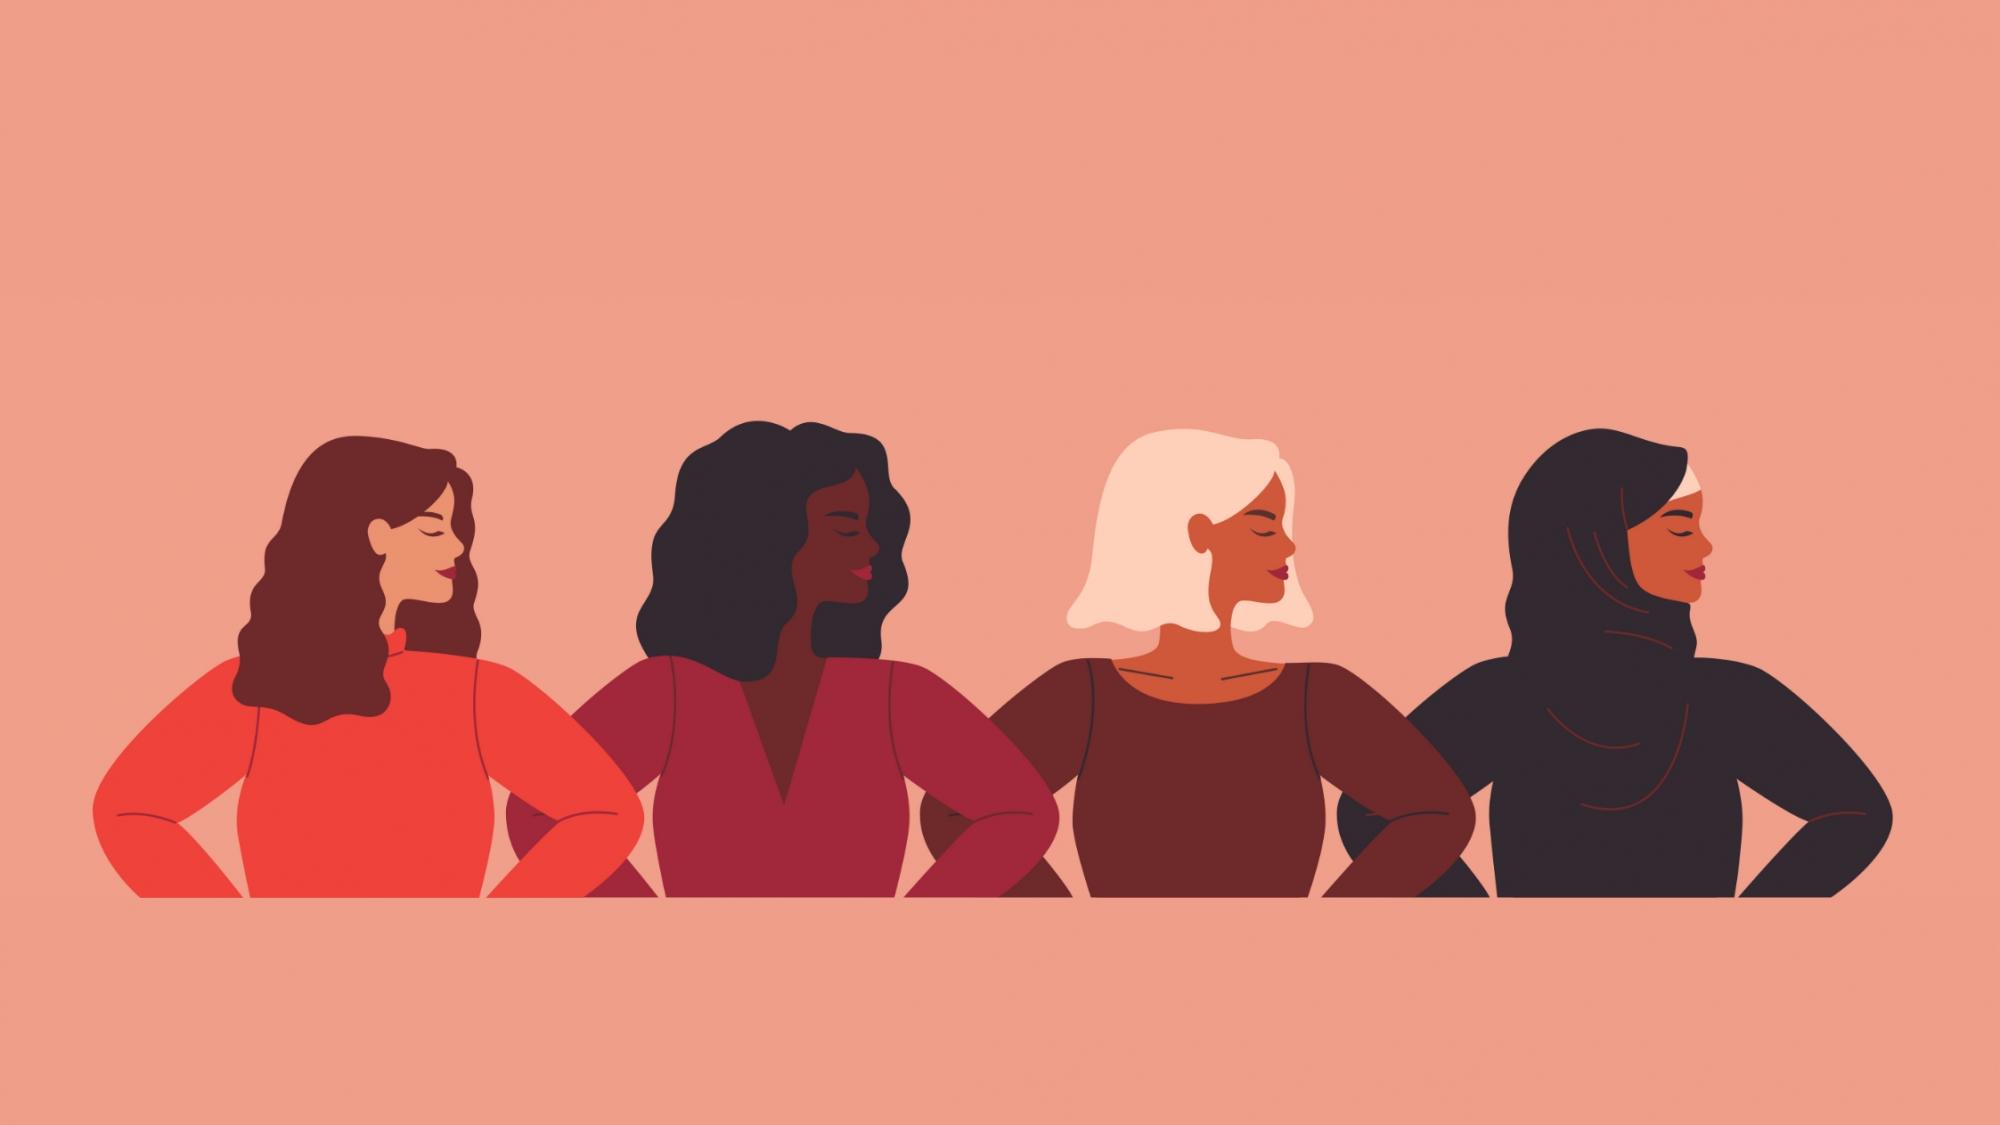 Illustration of women together from around the world